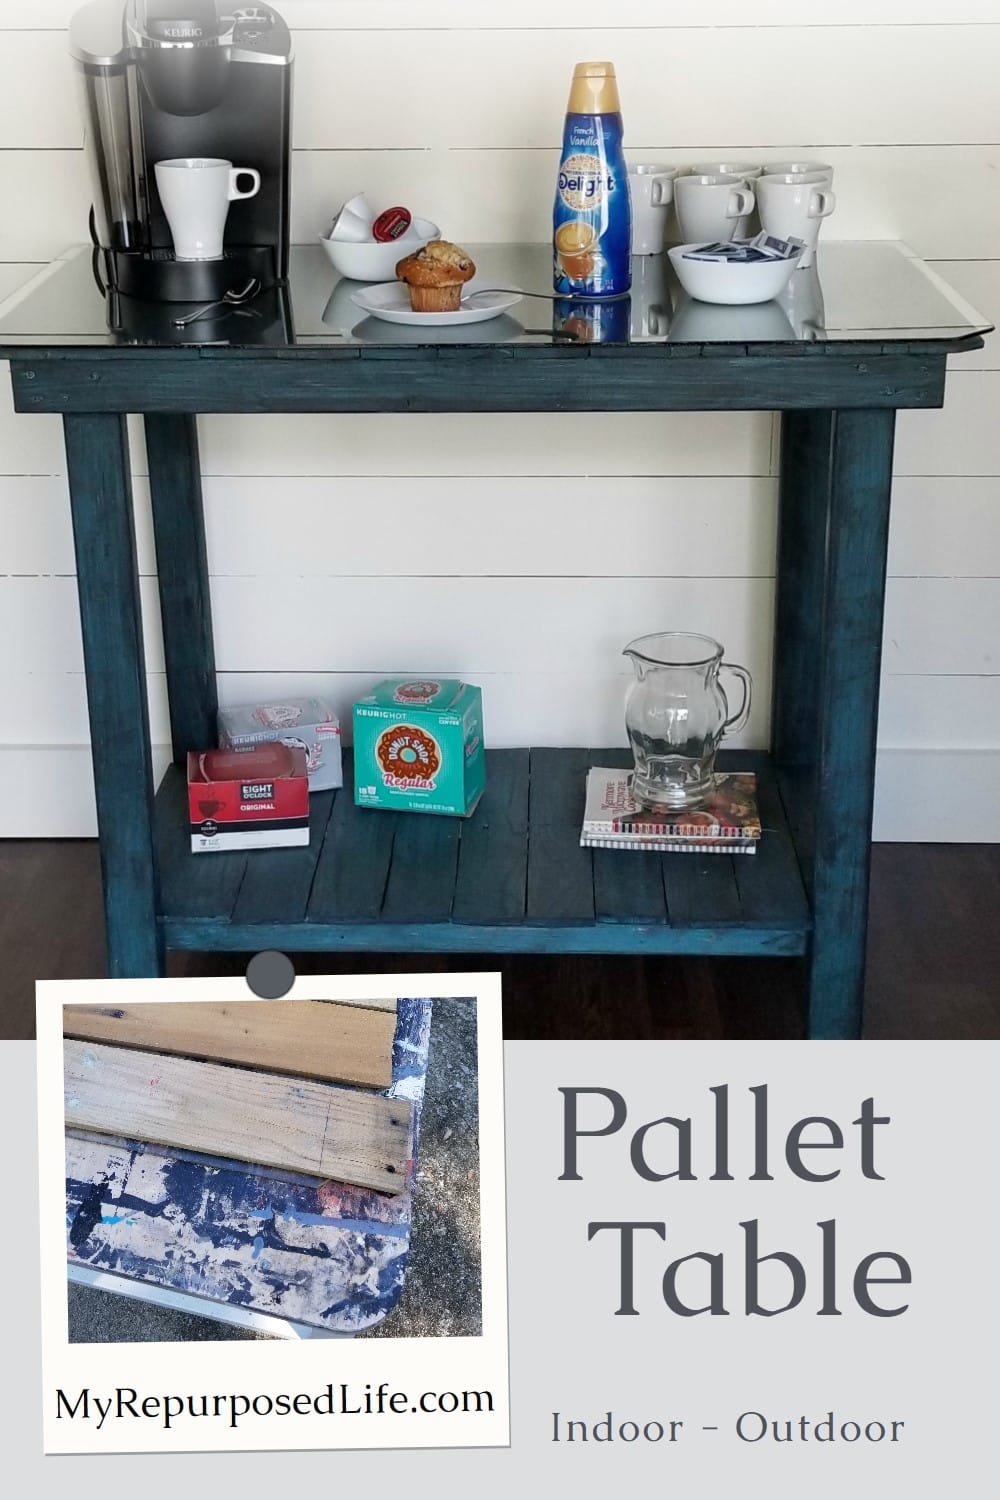 How to make a coffee bar pallet table. Tips for constructing a handy table/bar out of pallet wood. #MyRepurposedLife #repurposed #pallet #table #coffee #bar via @repurposedlife